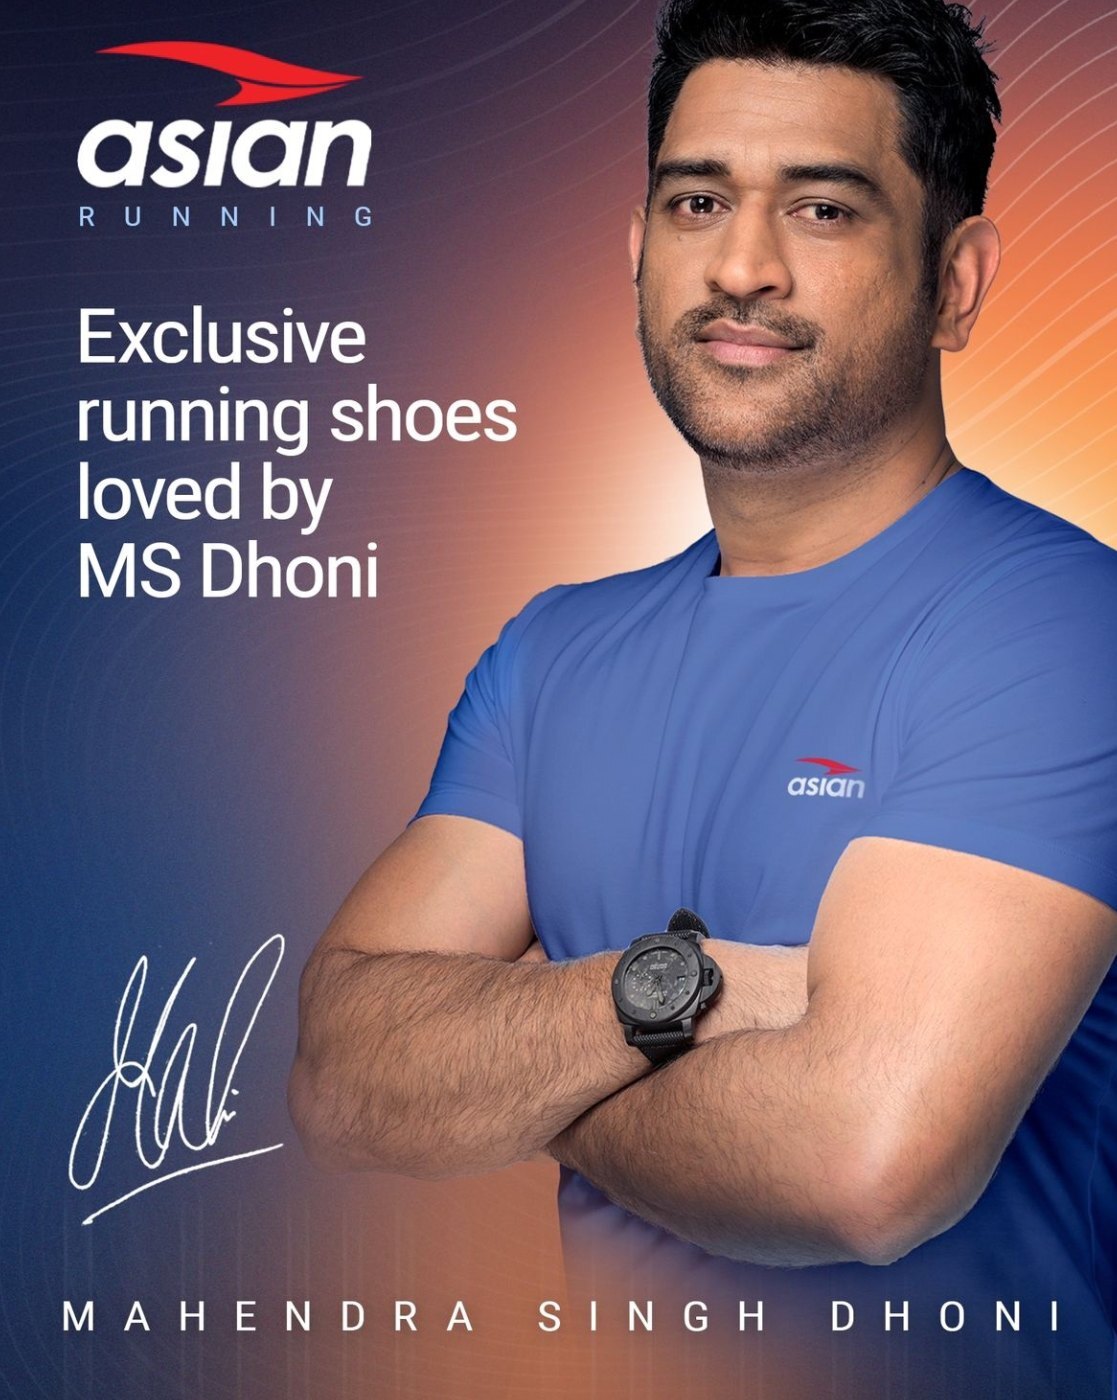 Why Asian Shoes?